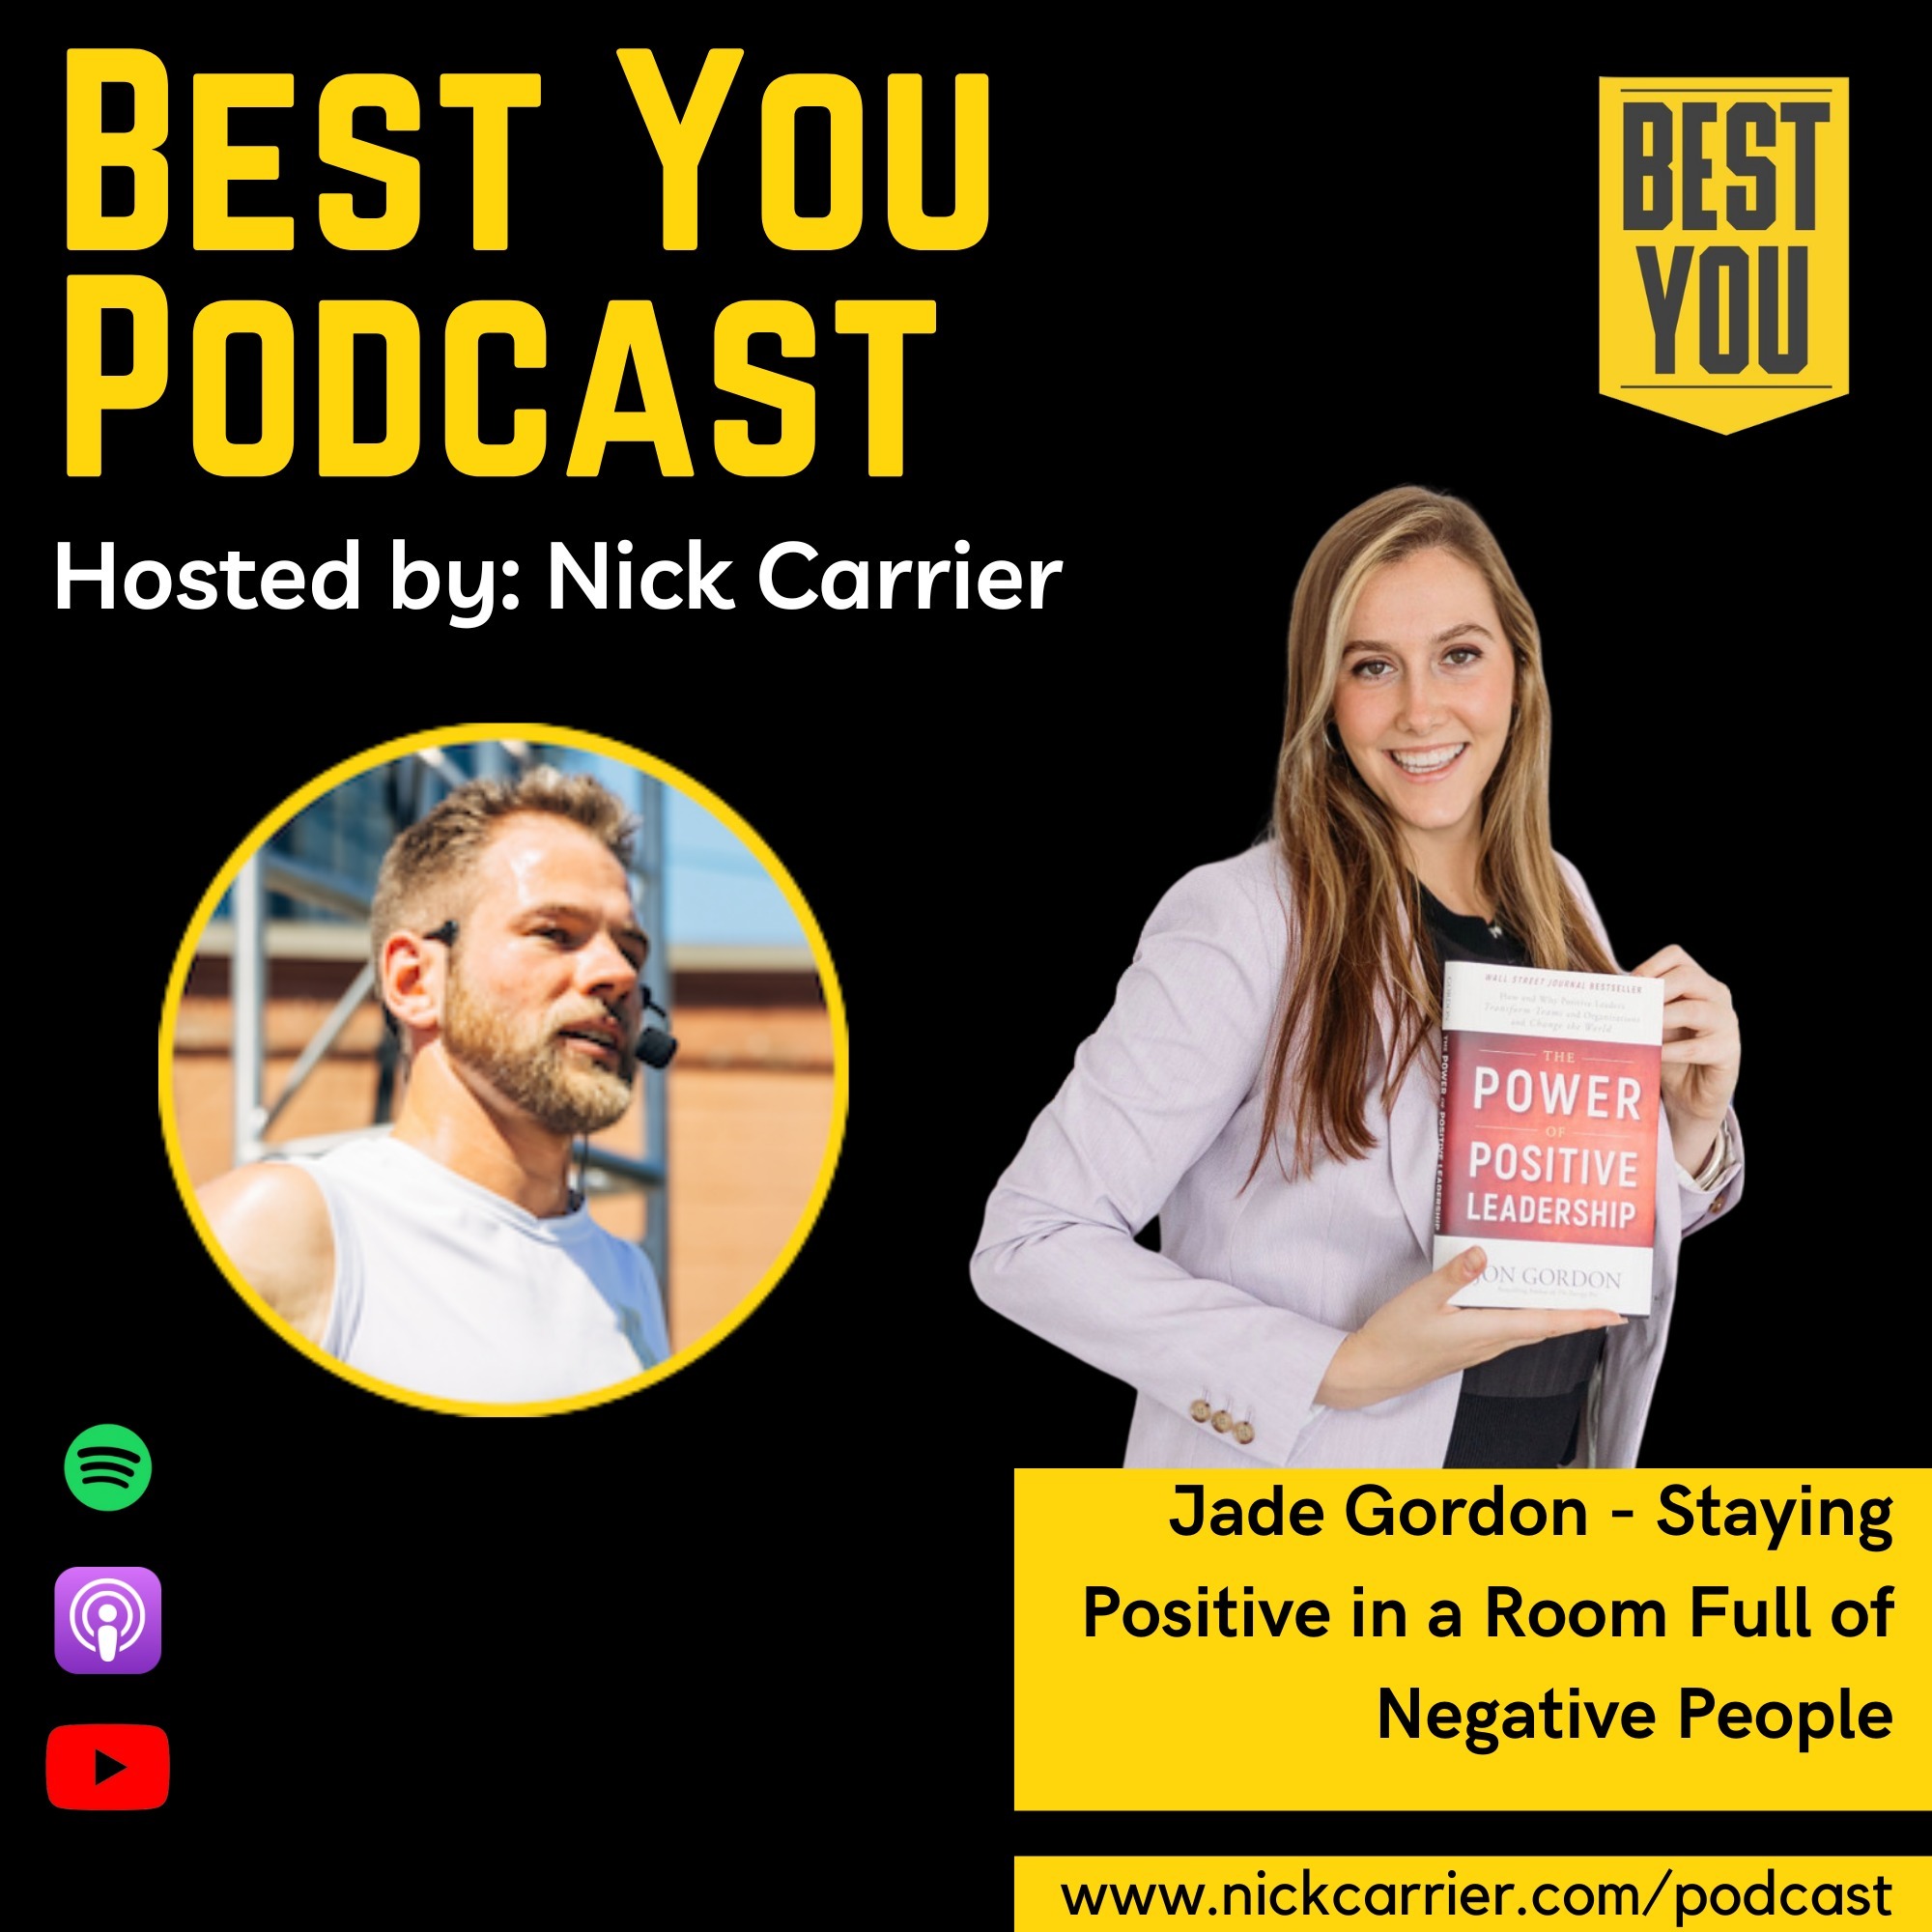 Jade Gordon - Staying Positive in a Room Full of Negative People